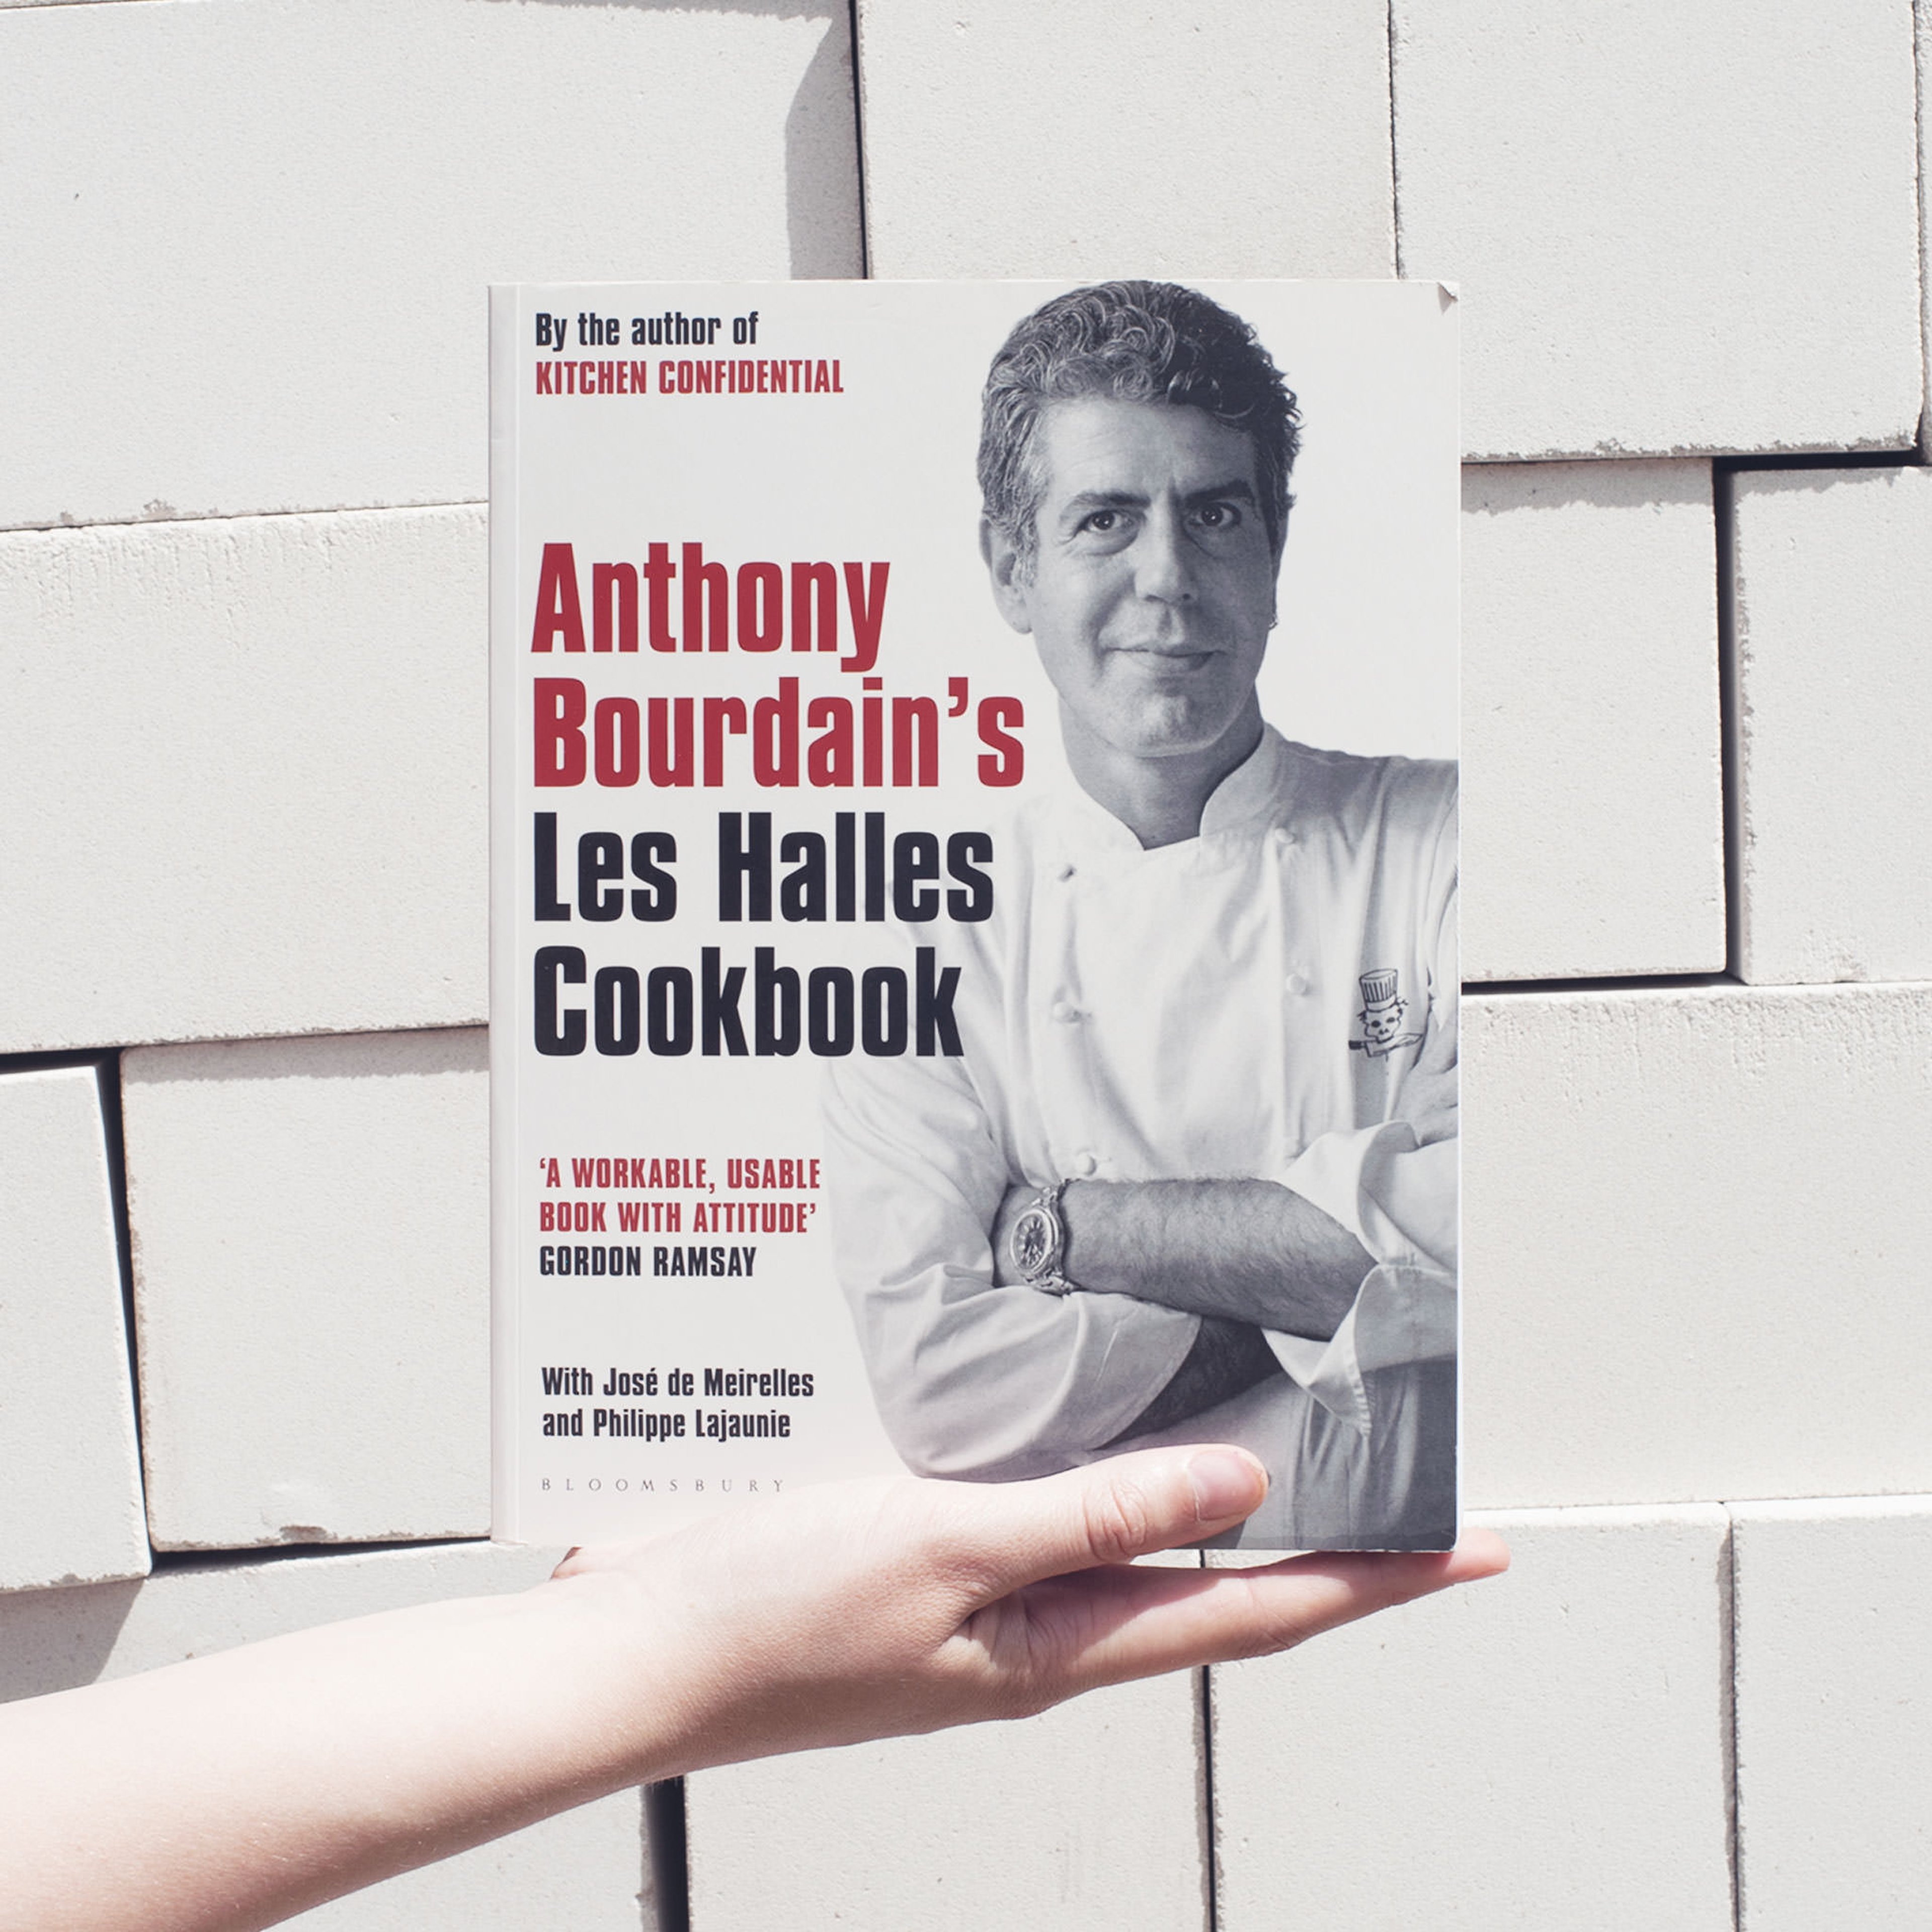 5 Lessons We Learned from Anthony Bourdain’s “Les Halles Cookbook”